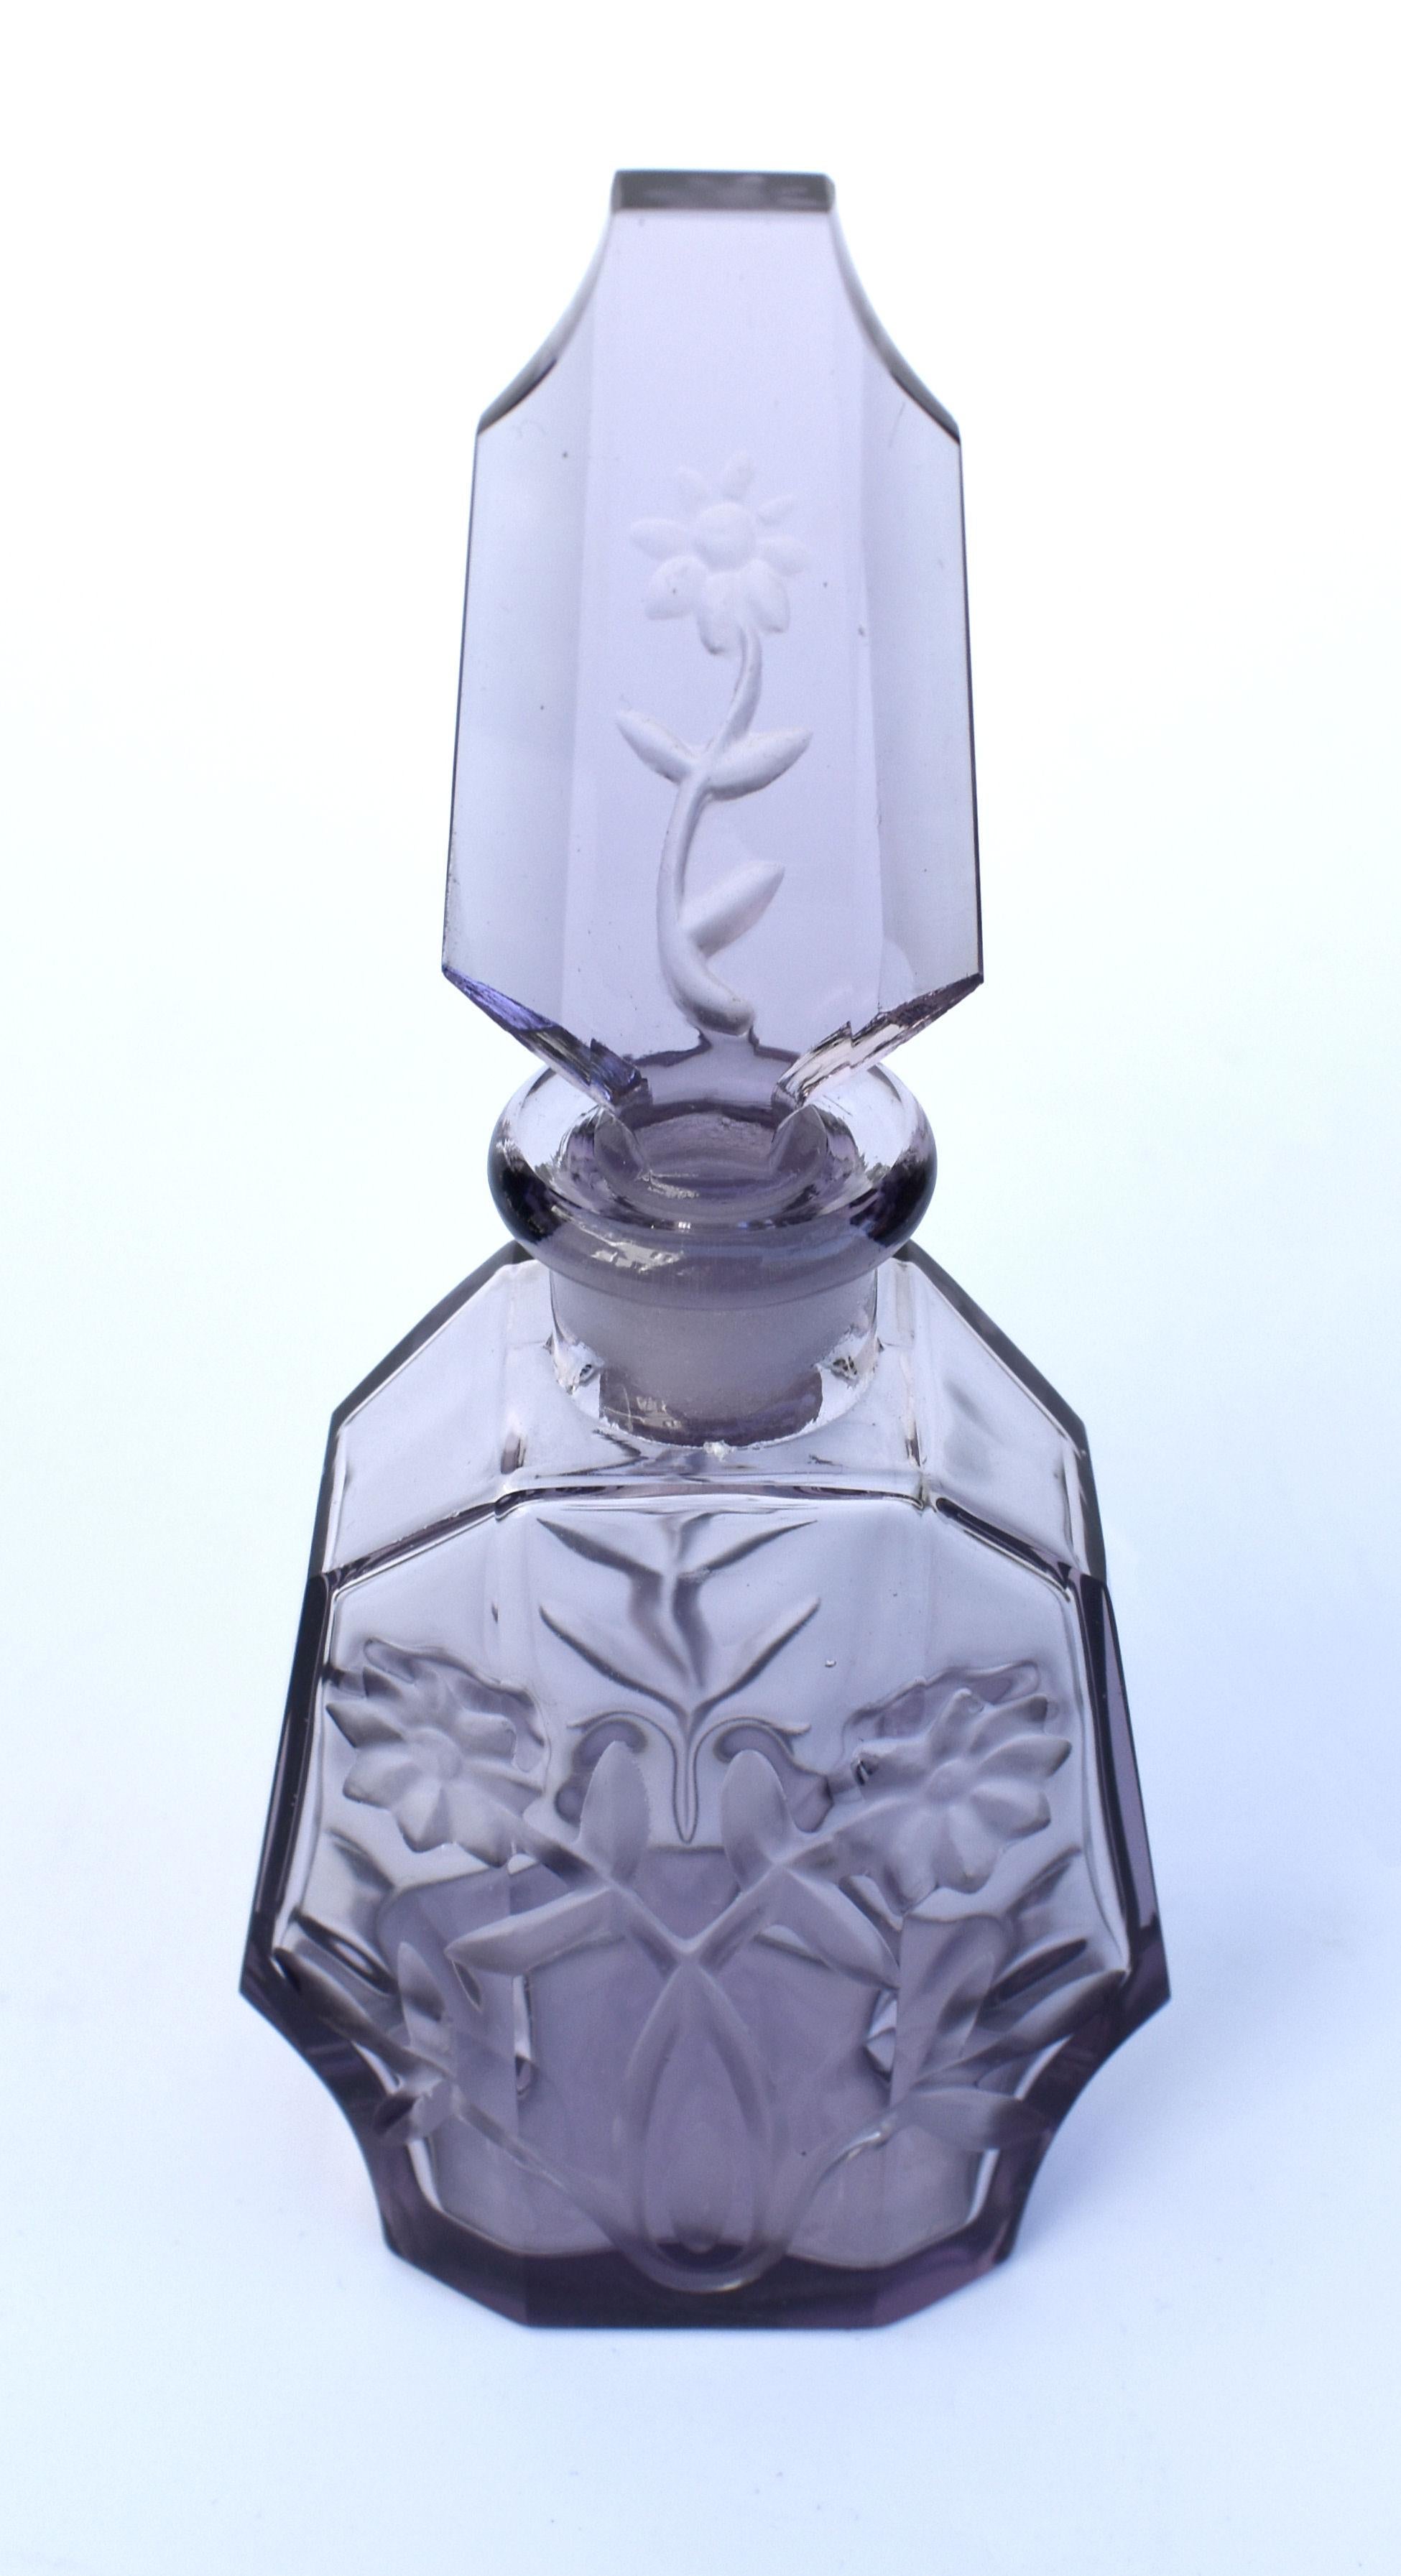 For your consideration is this stylish 1930's Art Deco crystal glass perfume bottle in a wonderful lilac colour. Beautifully etched floral decoration to both the body and stopper. Lovely item with no damage, just very minor signs of age. Very